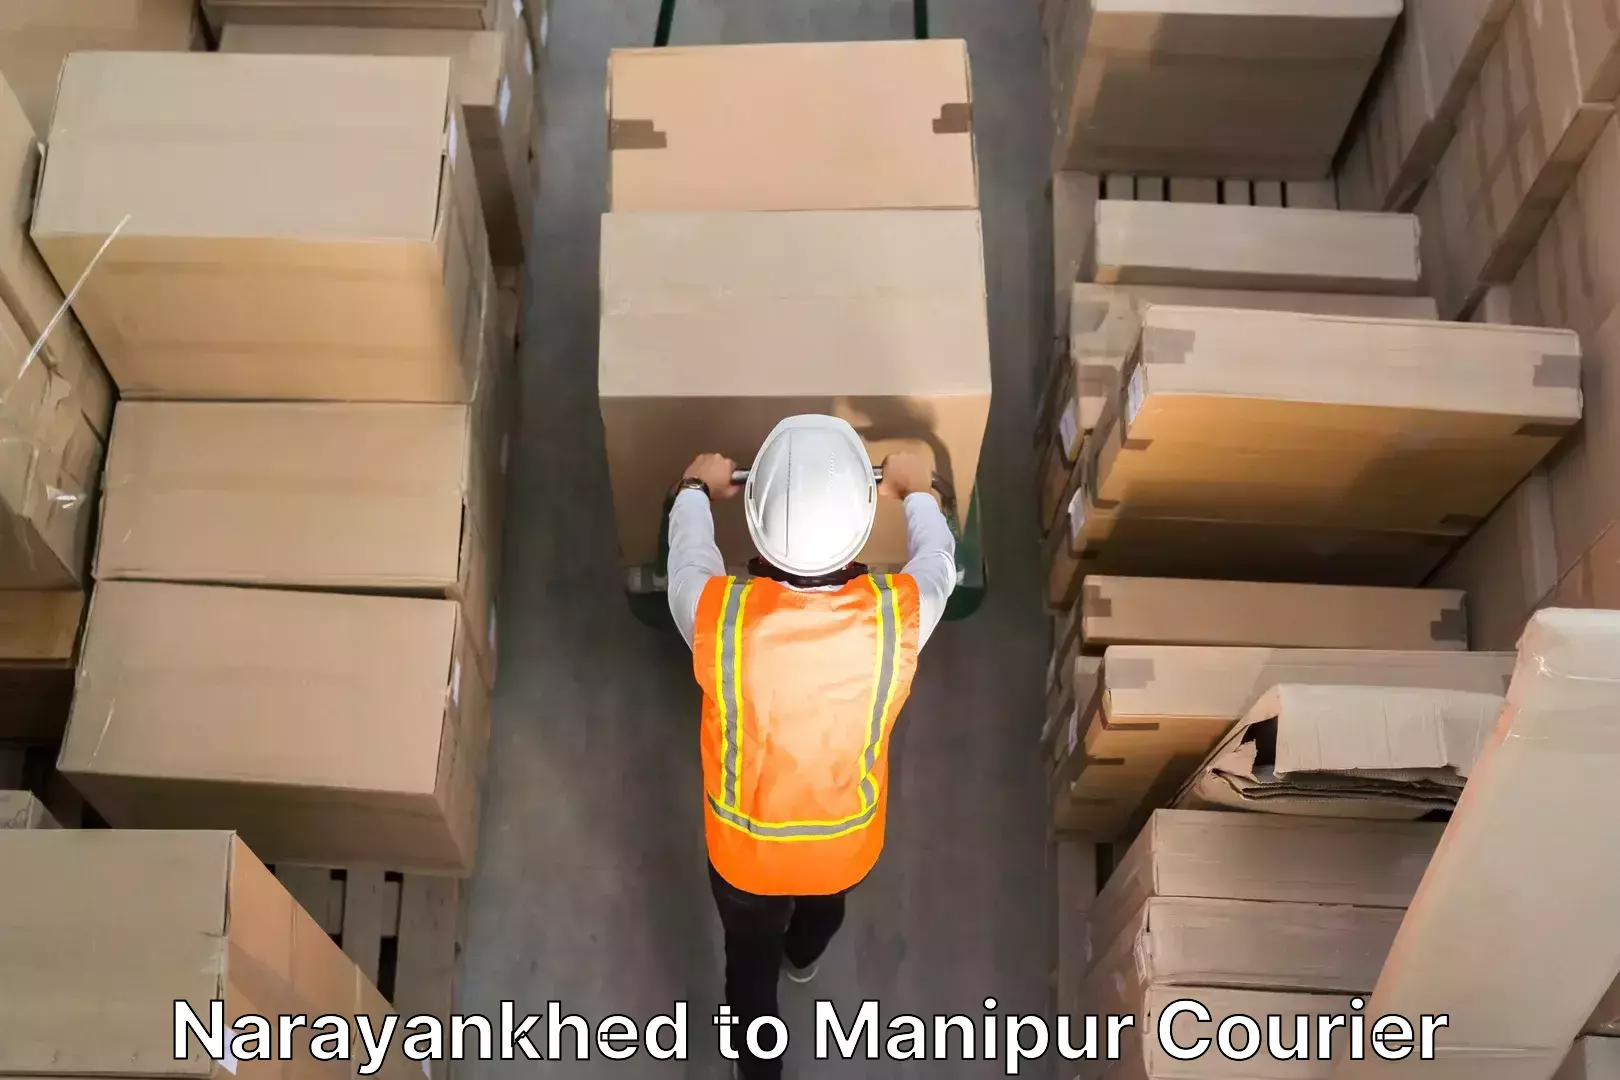 Trusted relocation experts Narayankhed to Manipur